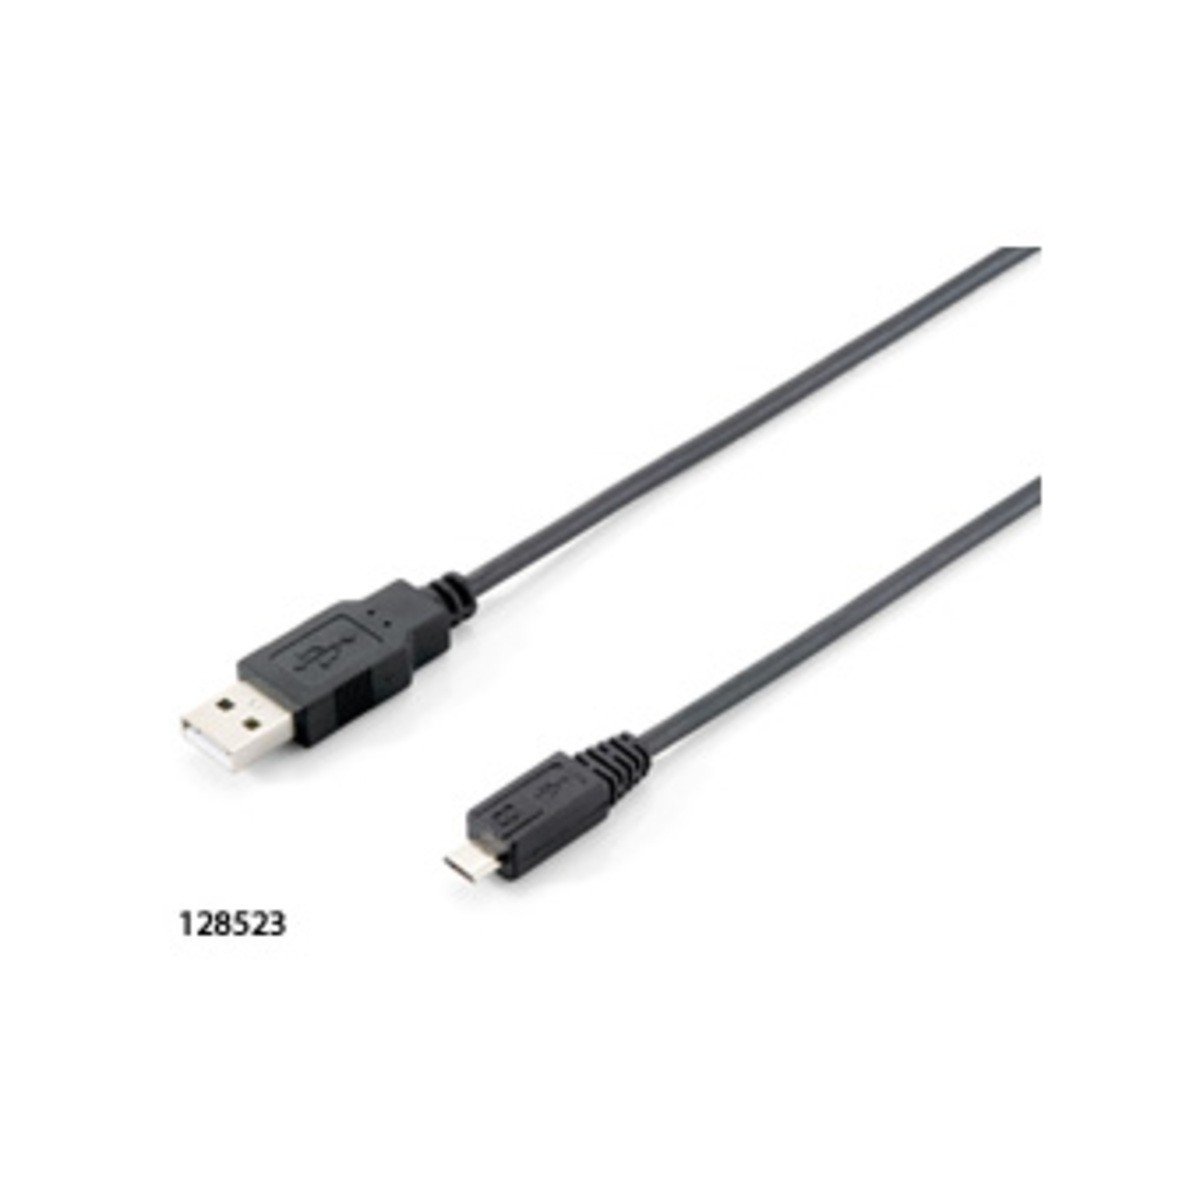 USB 2.0 CABLE  A/M -> MICRO B/M 1.0